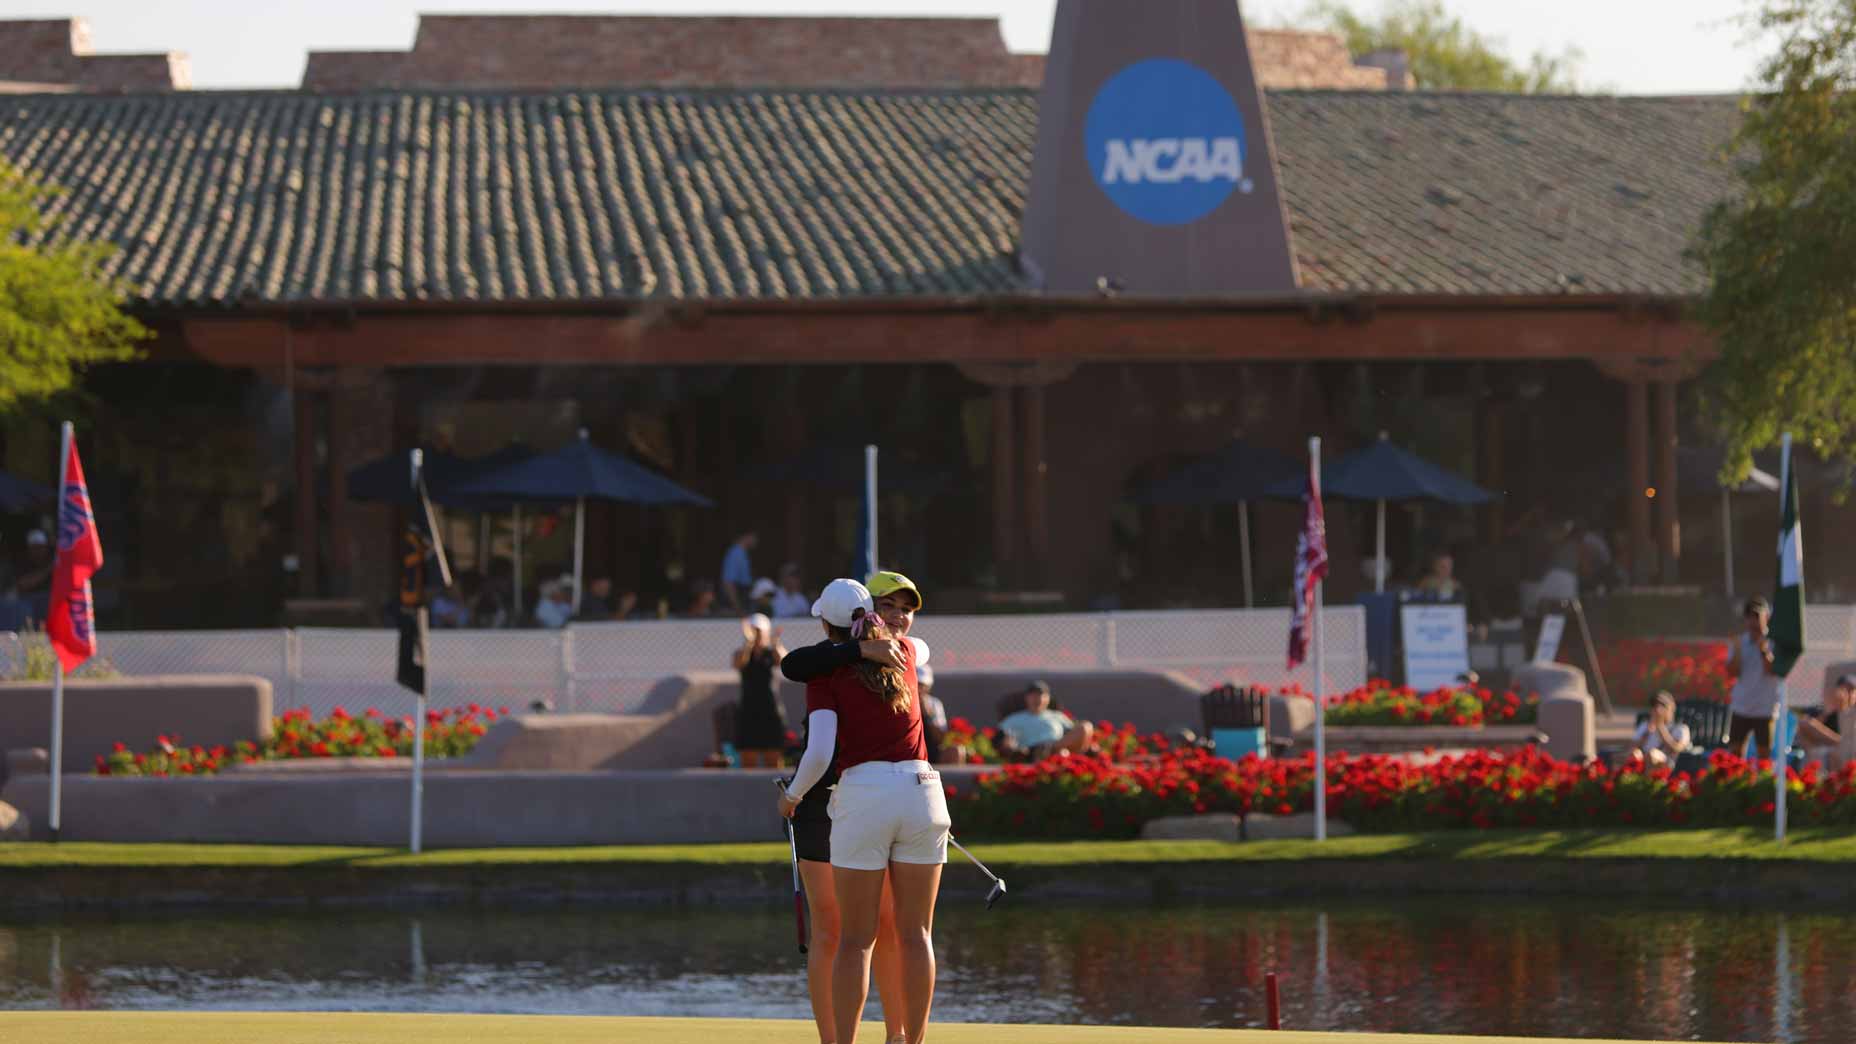 Briana Chacon of the Oregon Ducks hugs Sadie Englemann of the Stanford Cardinal after winning their match up during the Division I Womens Golf Championship held at the Grayhawk Golf Club on May 25, 2022 in Scottsdale, Arizona.